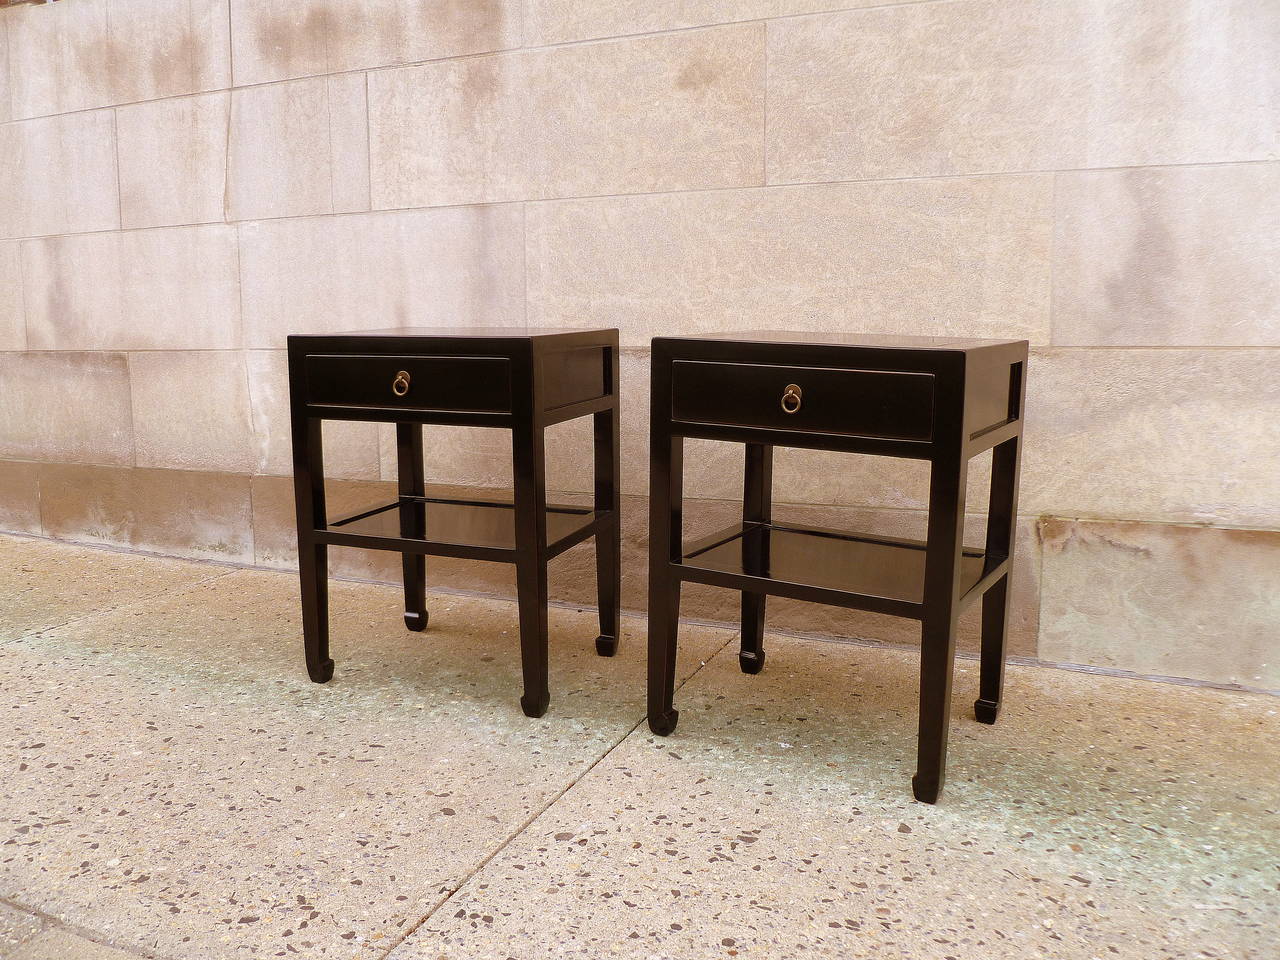 Polished A Pair of Black Lacquer End Tables with Shelf and Drawer